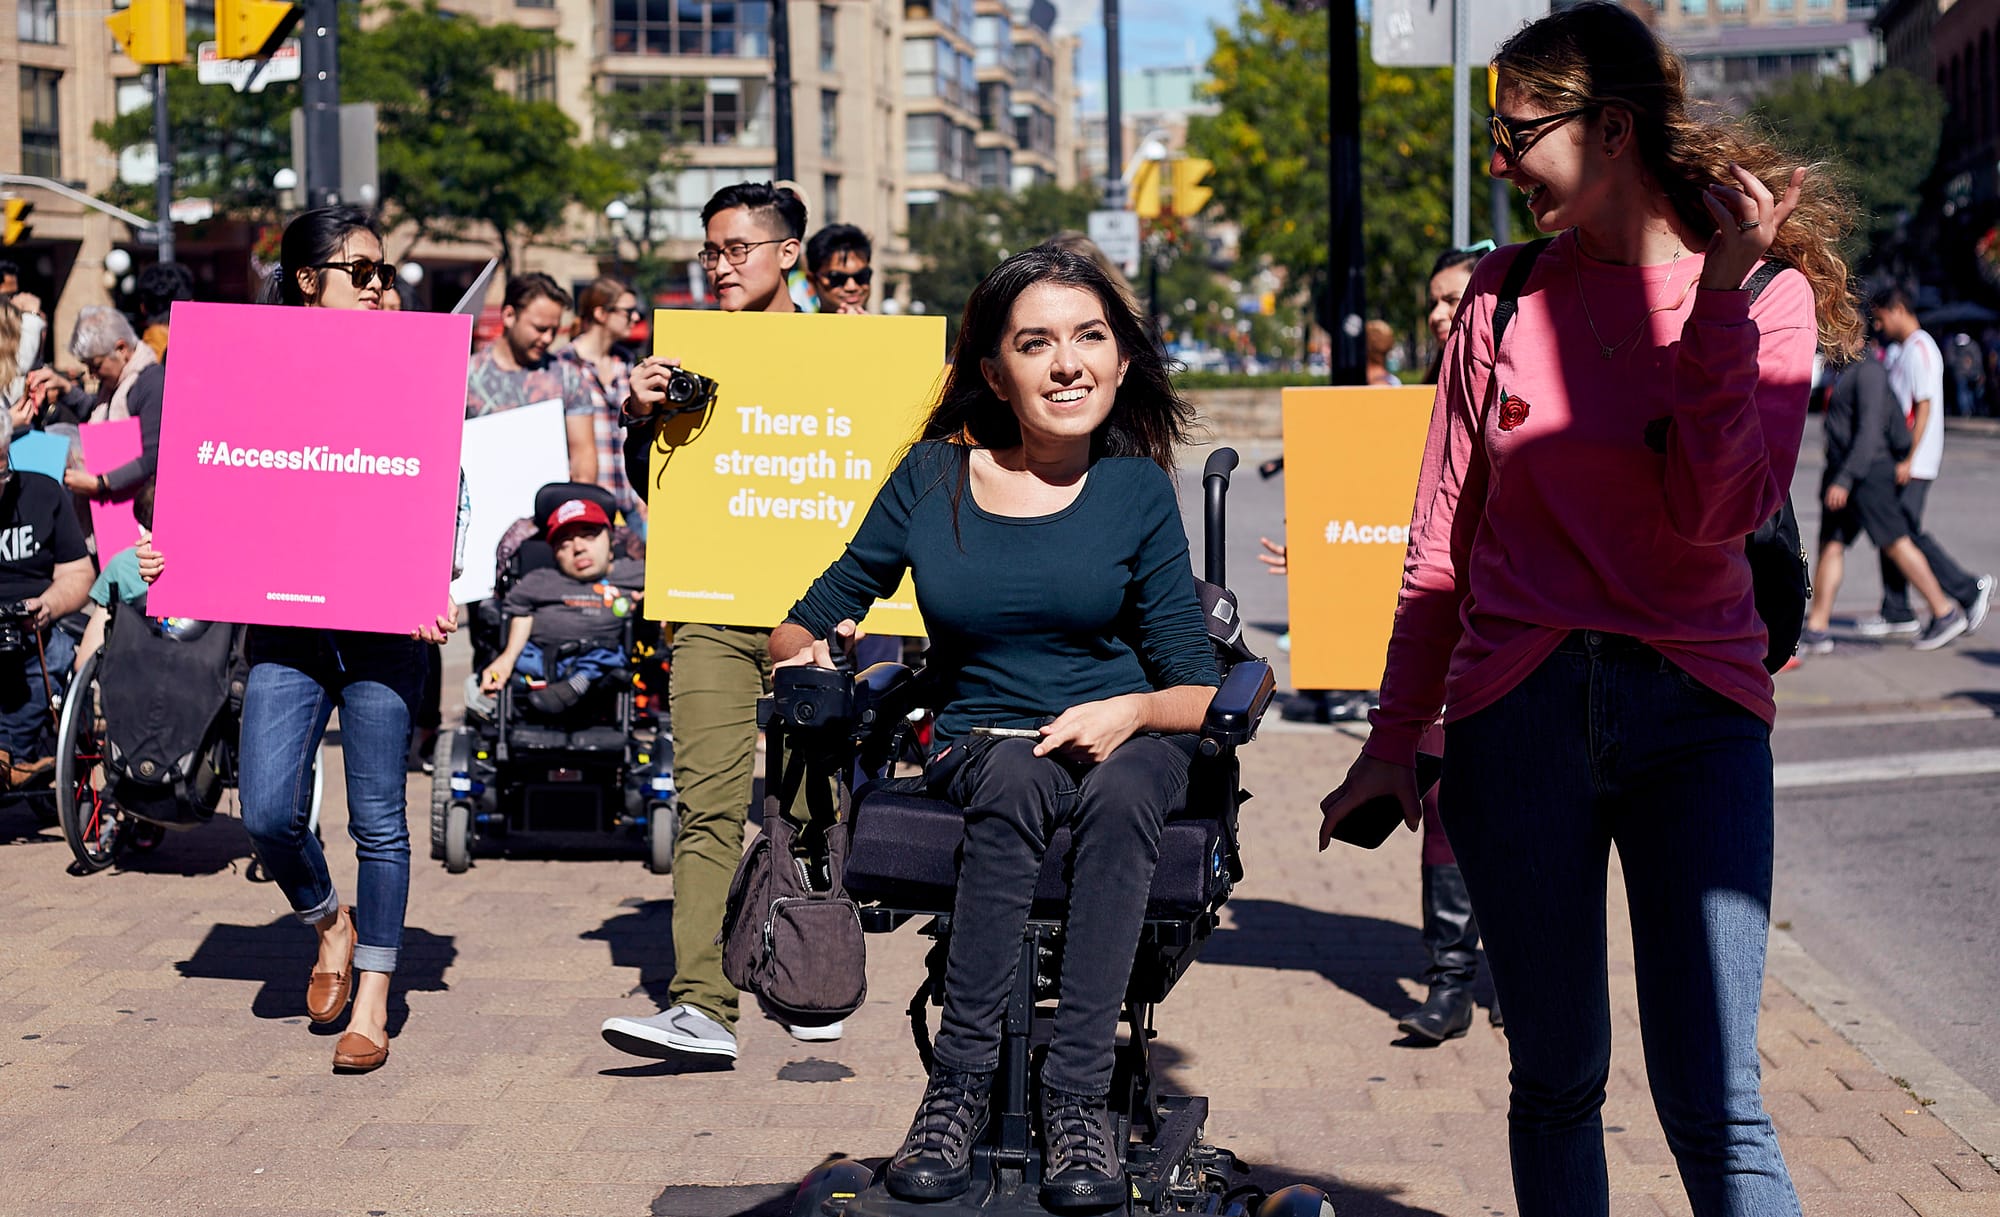 App uses crowd-sourcing to rate accessibility